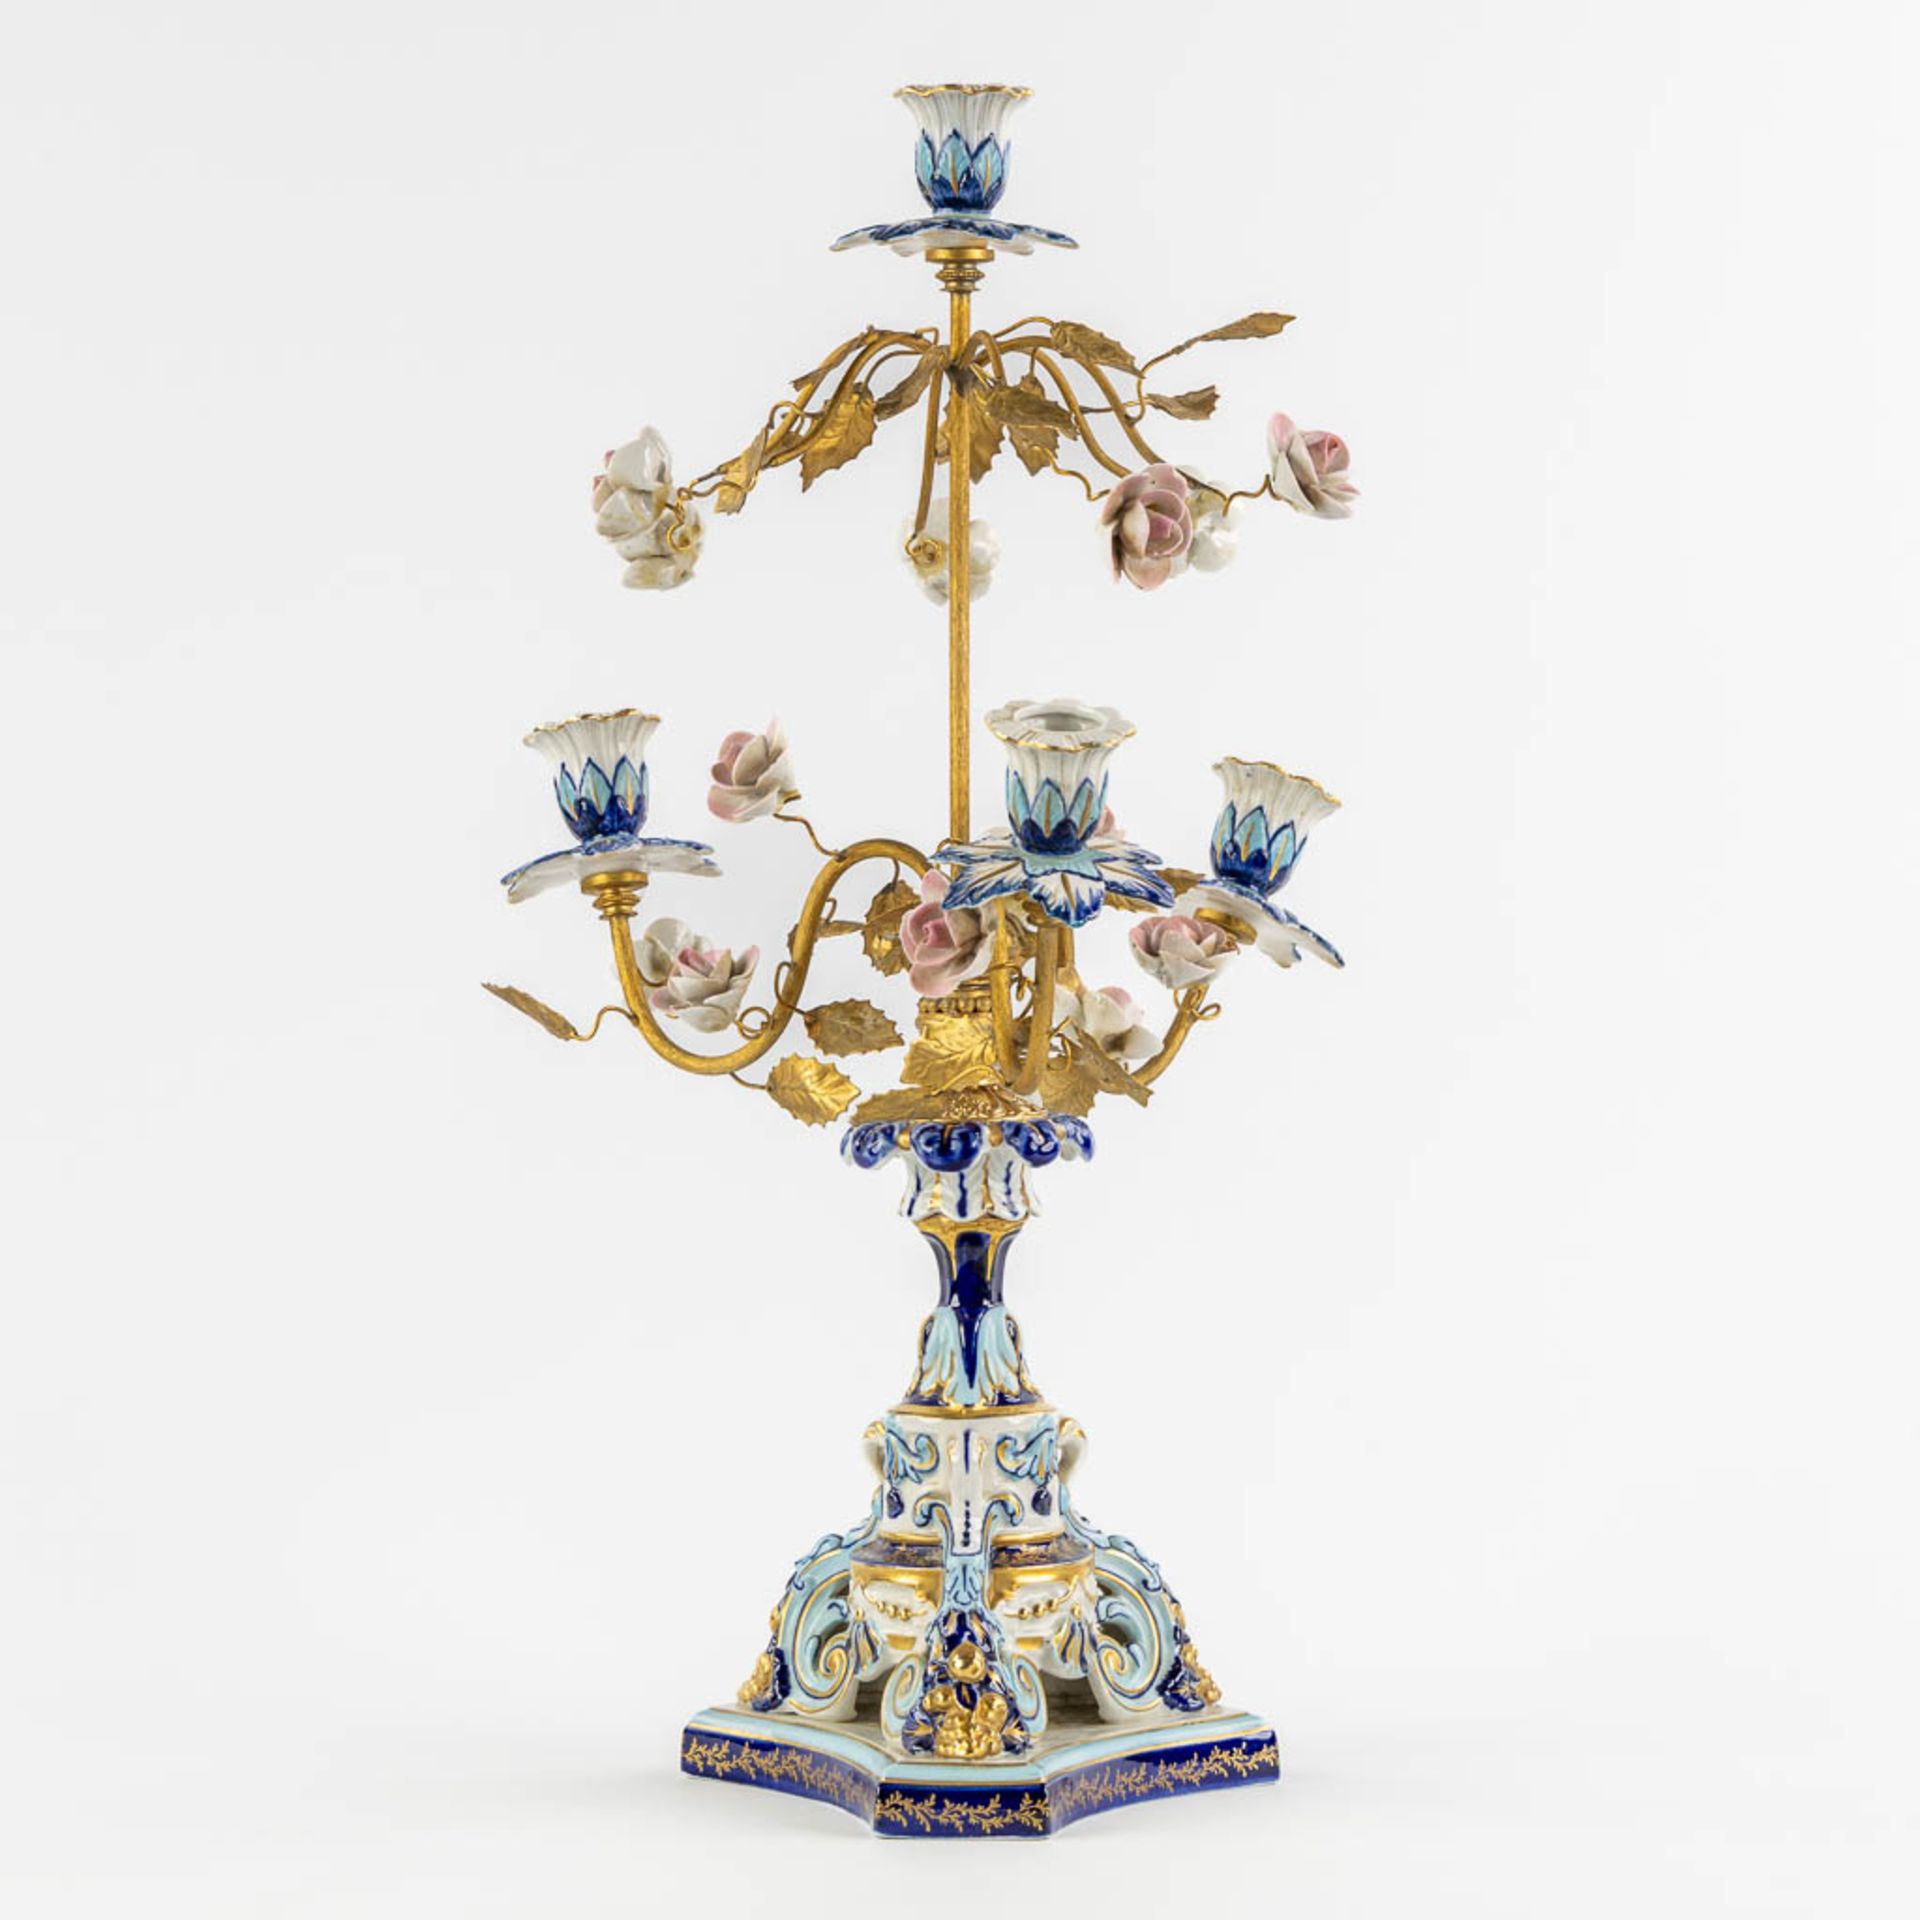 A candelabra, gilt brass and polychrome porcelain with flowers. Sèvres marks. (H:51 x D:24 cm) - Image 3 of 10